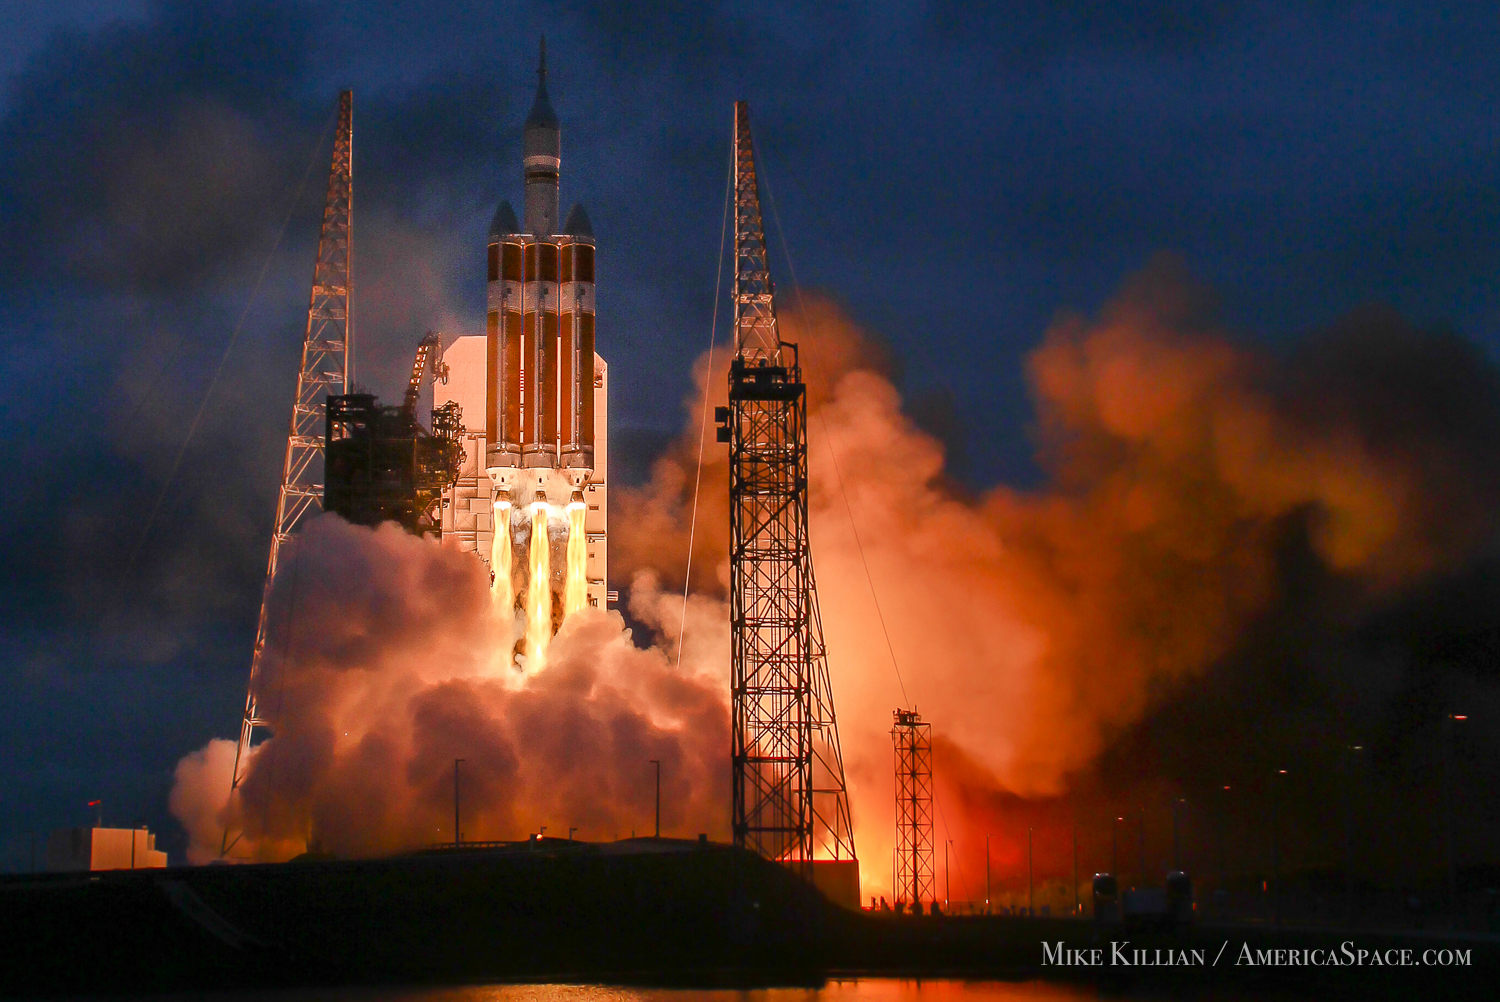 A ULA Delta-IV Heavy launching NASA's Orion crew capsule on its first orbital flight test in late 2014, EFT-1. Photo Credit: Mike Killian / AmericaSpace